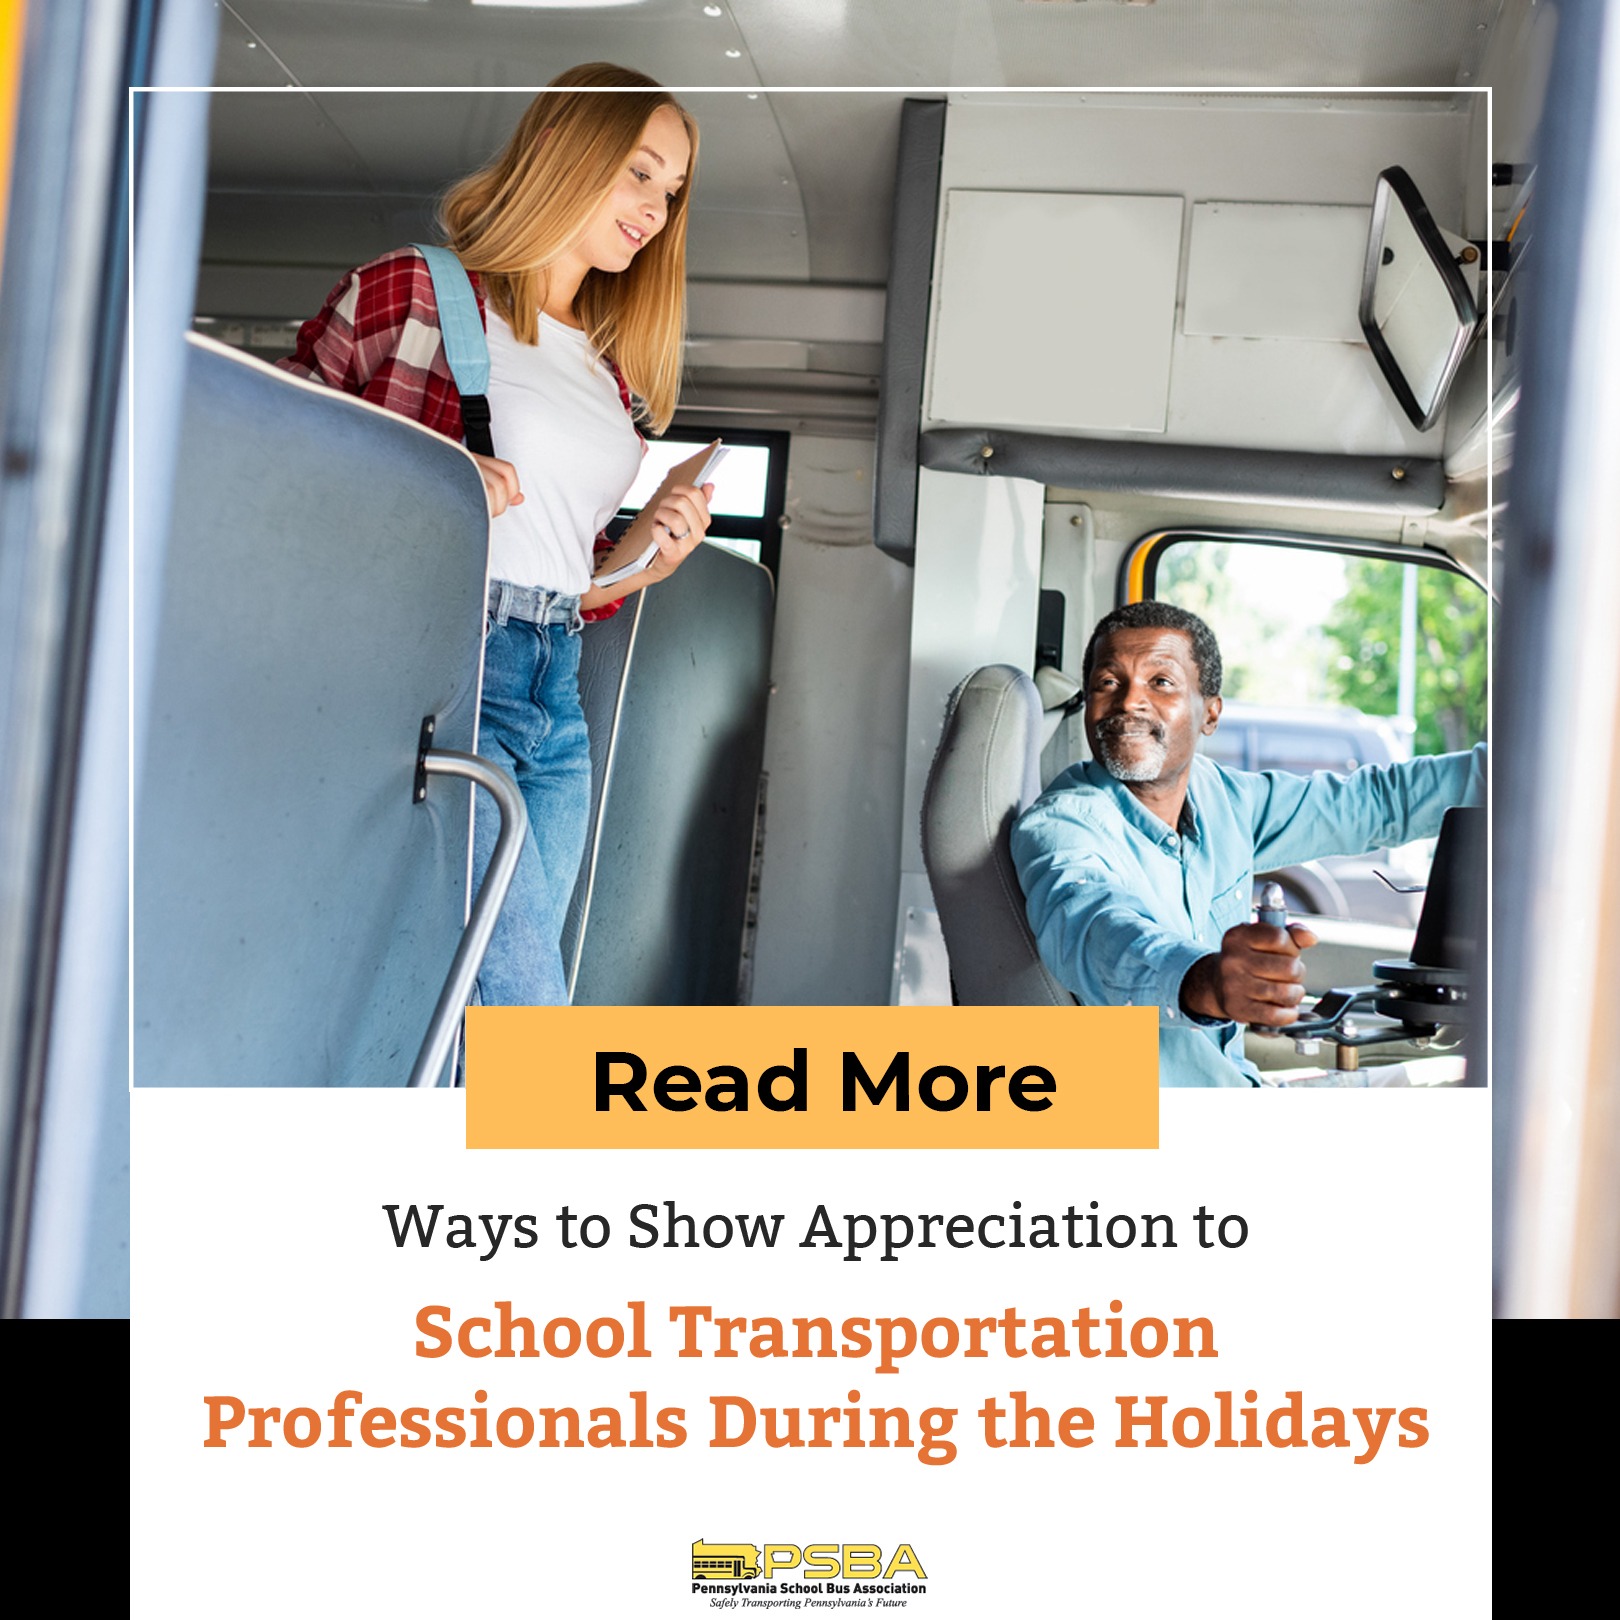 Ways to Show Appreciation to School Transportation Professionals During the Holidays